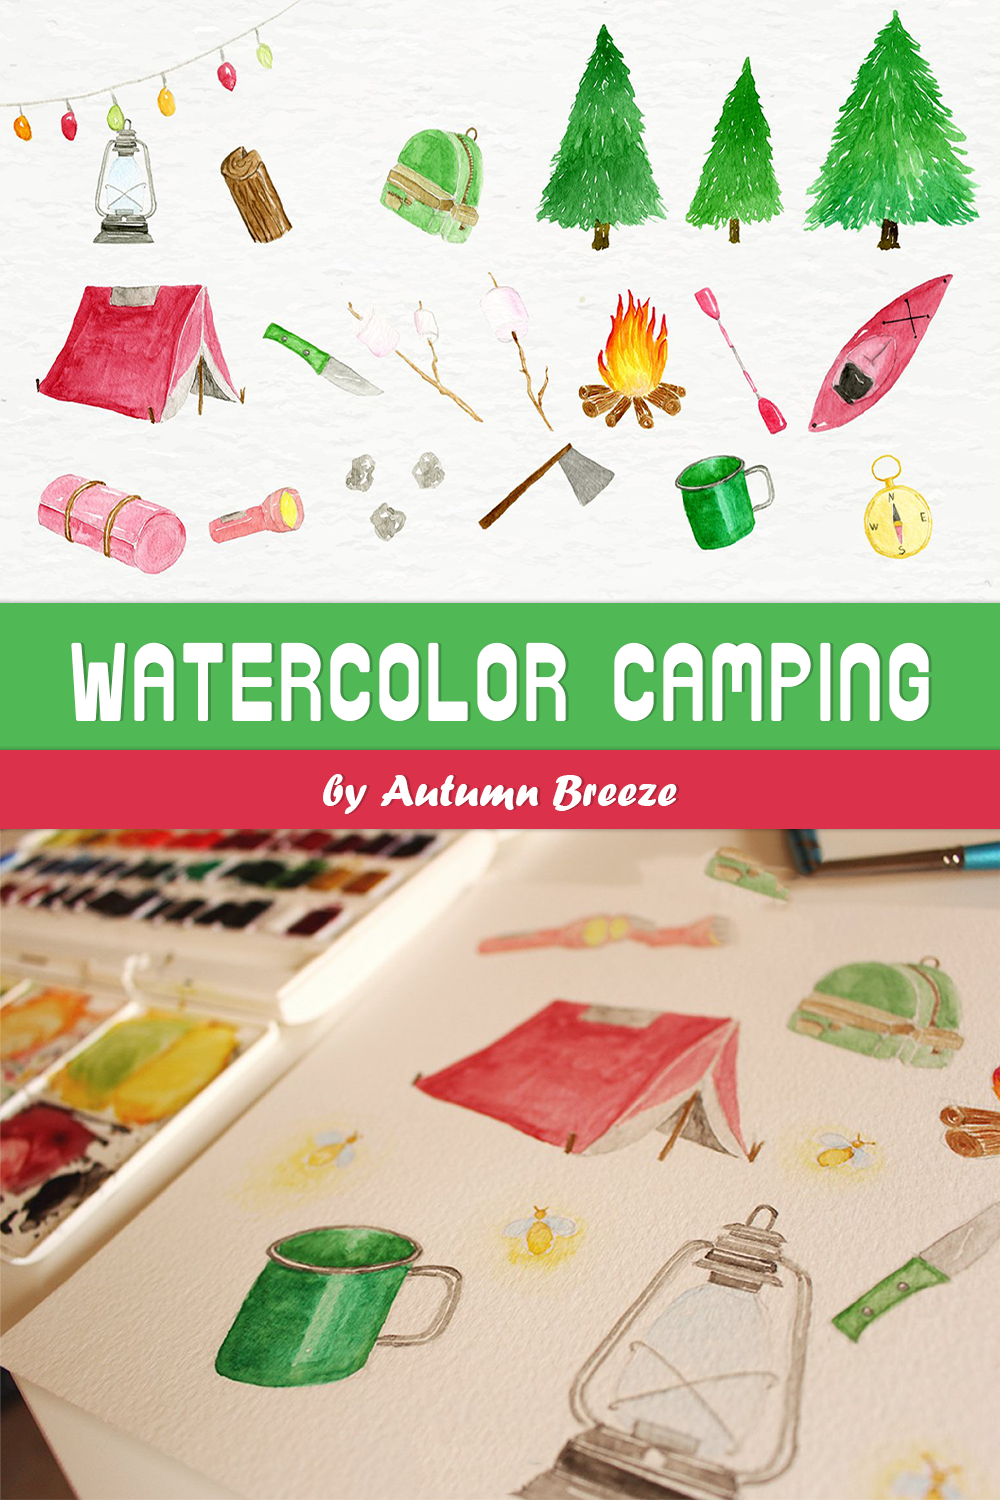 Watercolor camping of pinterest.